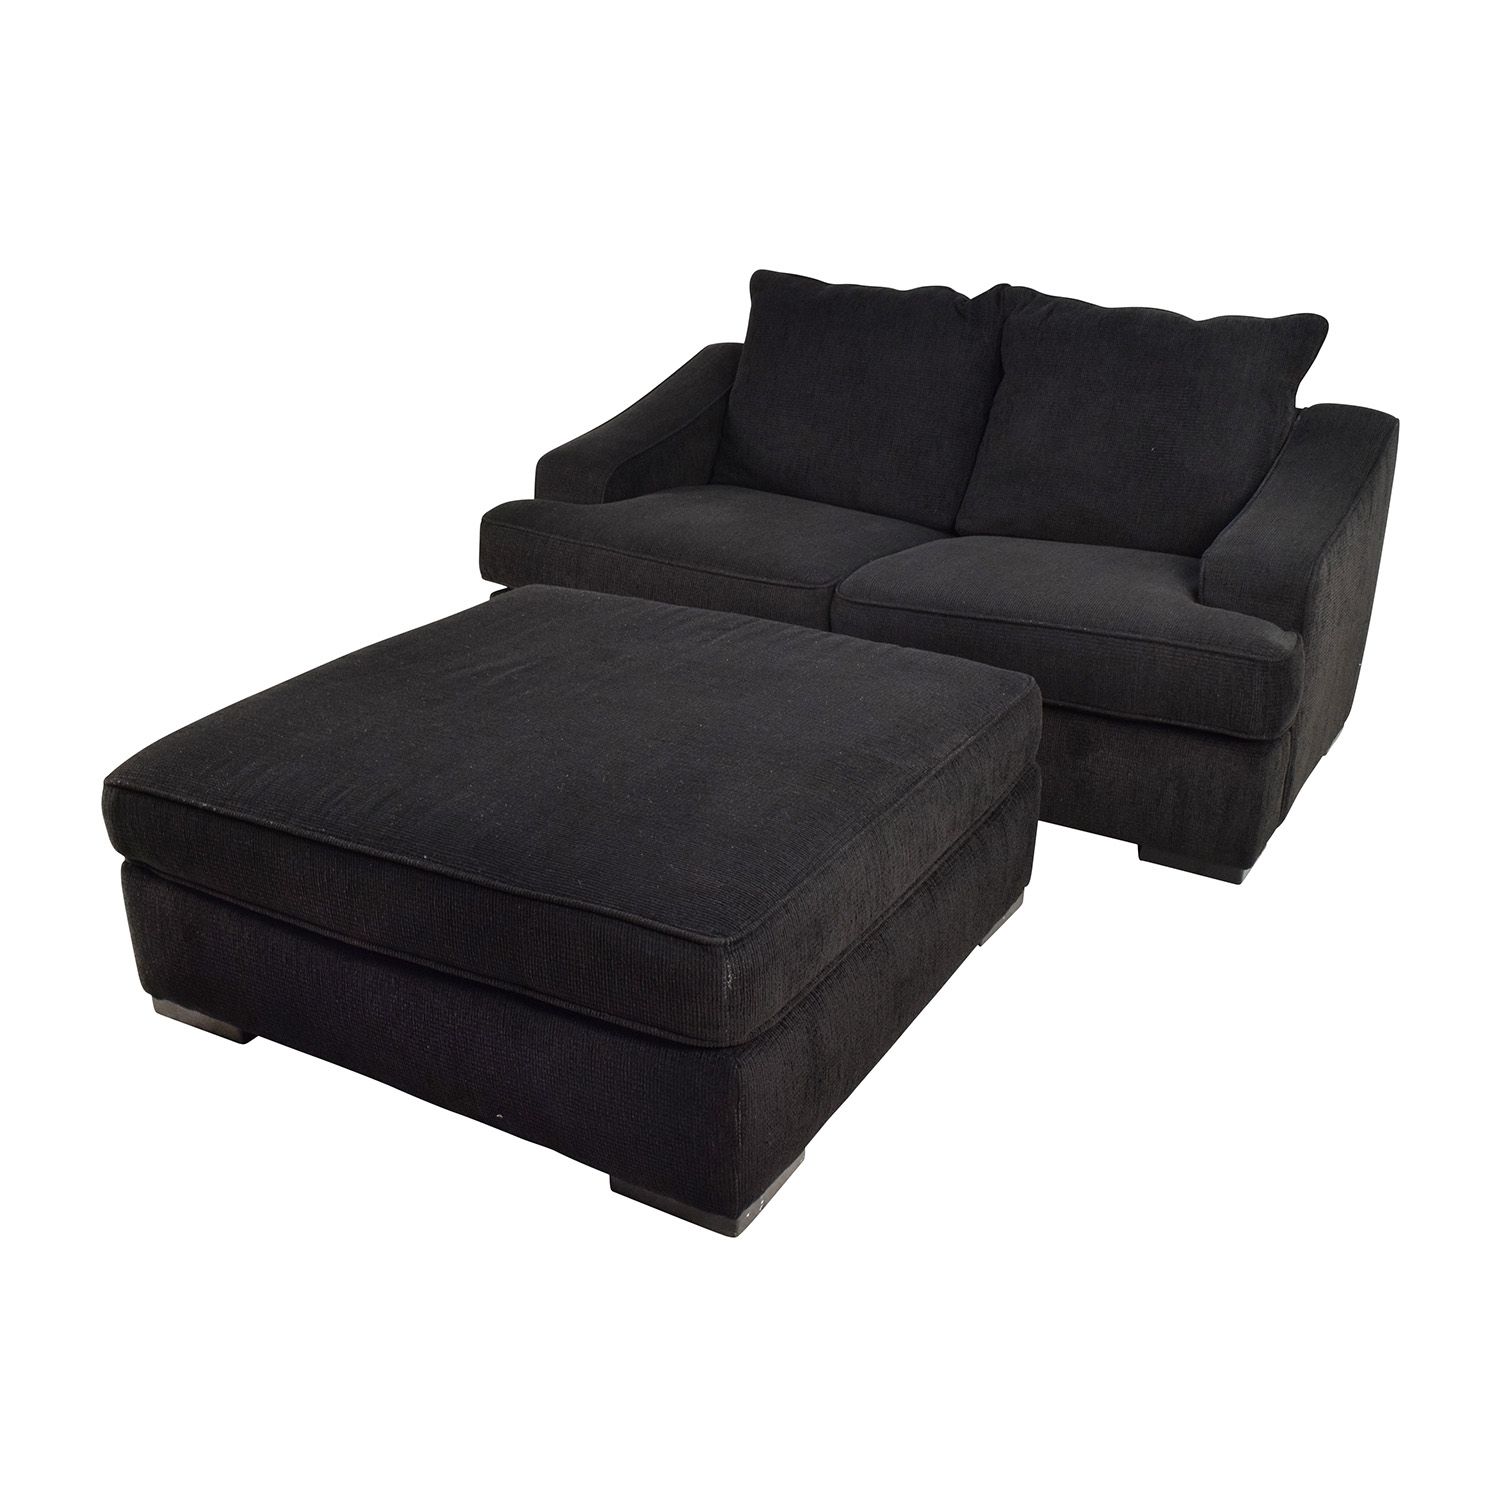 67% Off – Black Cloth Loveseat And Matching Oversized Ottoman / Sofas In Loveseats With Ottoman (View 3 of 10)